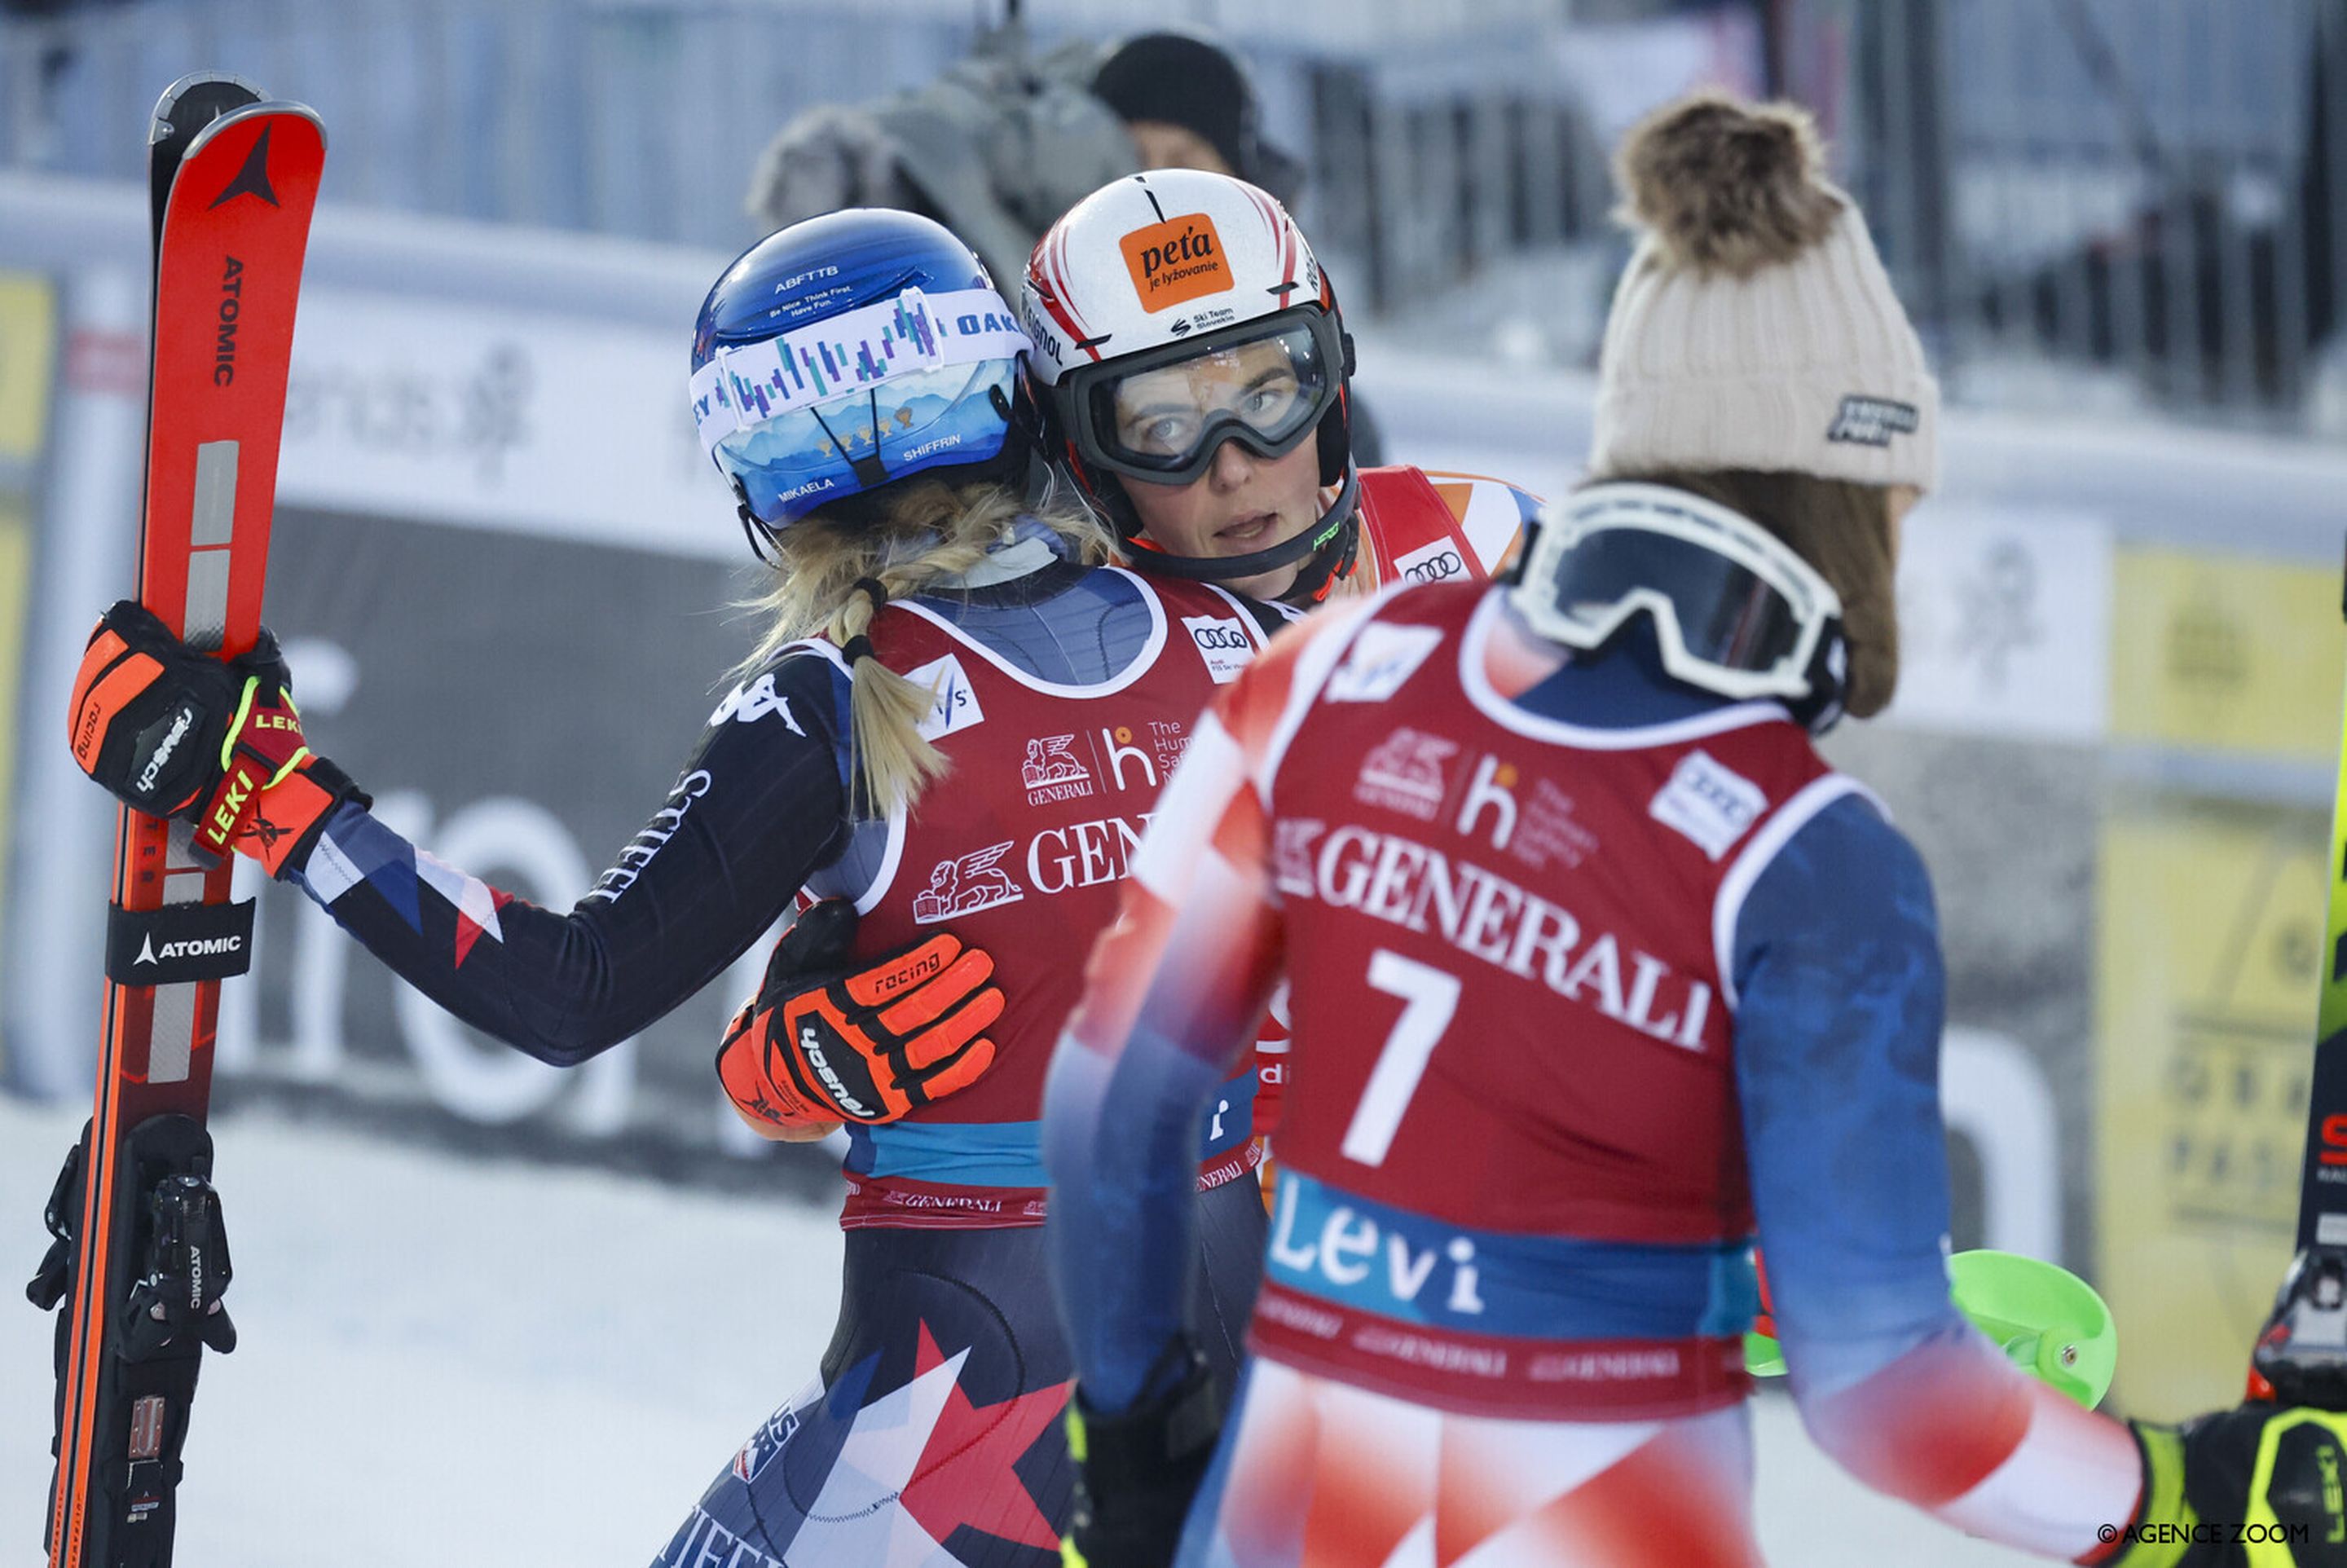 Shiffrin and Vlhova embrace in the finish area after Vlhova's straddle handed the race to the American